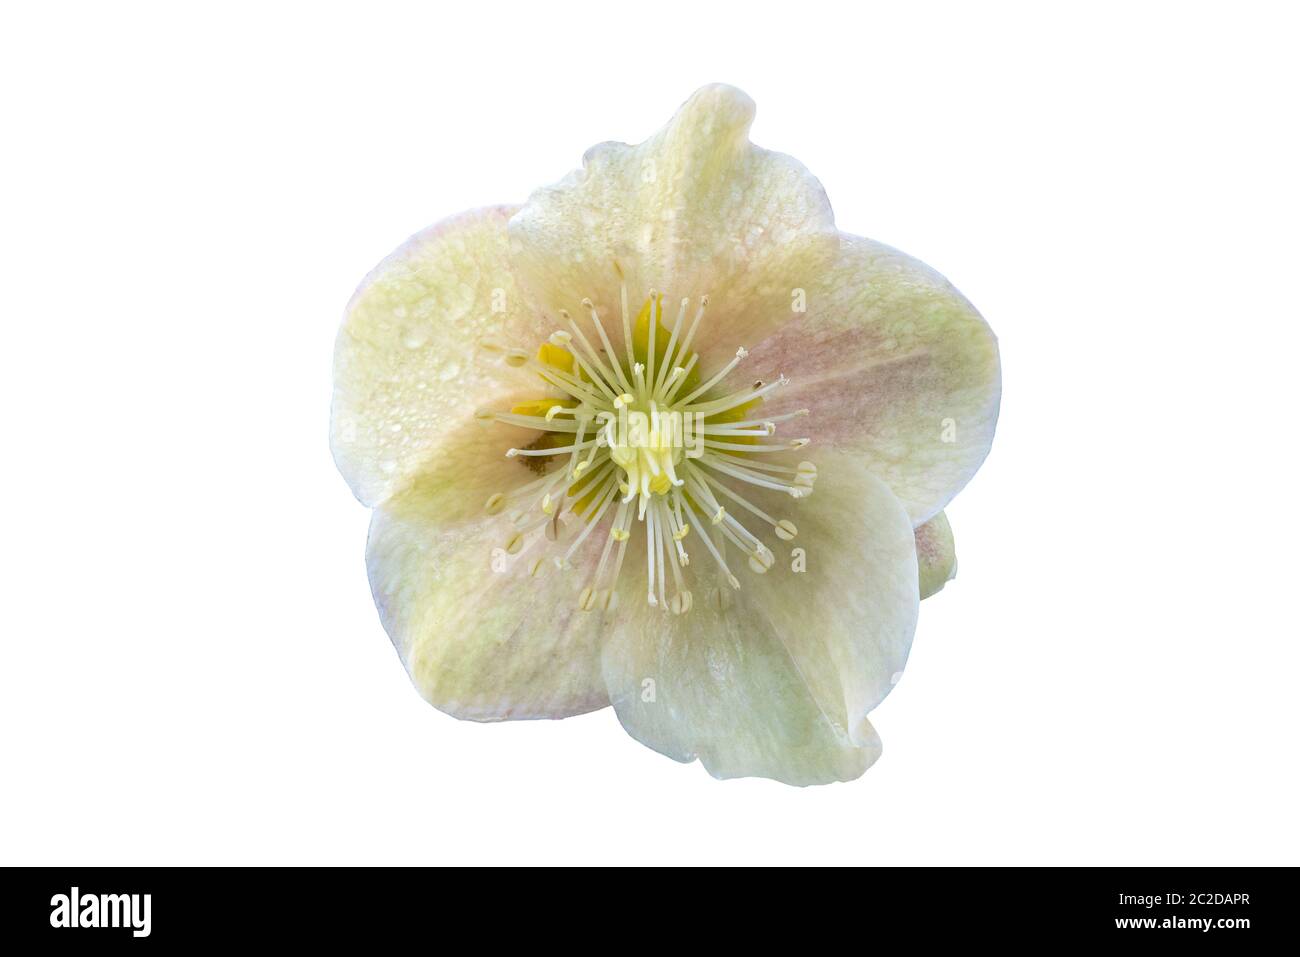 Helleborus x ballardiae 'Cinnamon Snow' a winter spring flower plant cut out and isolated on a white background Stock Photo